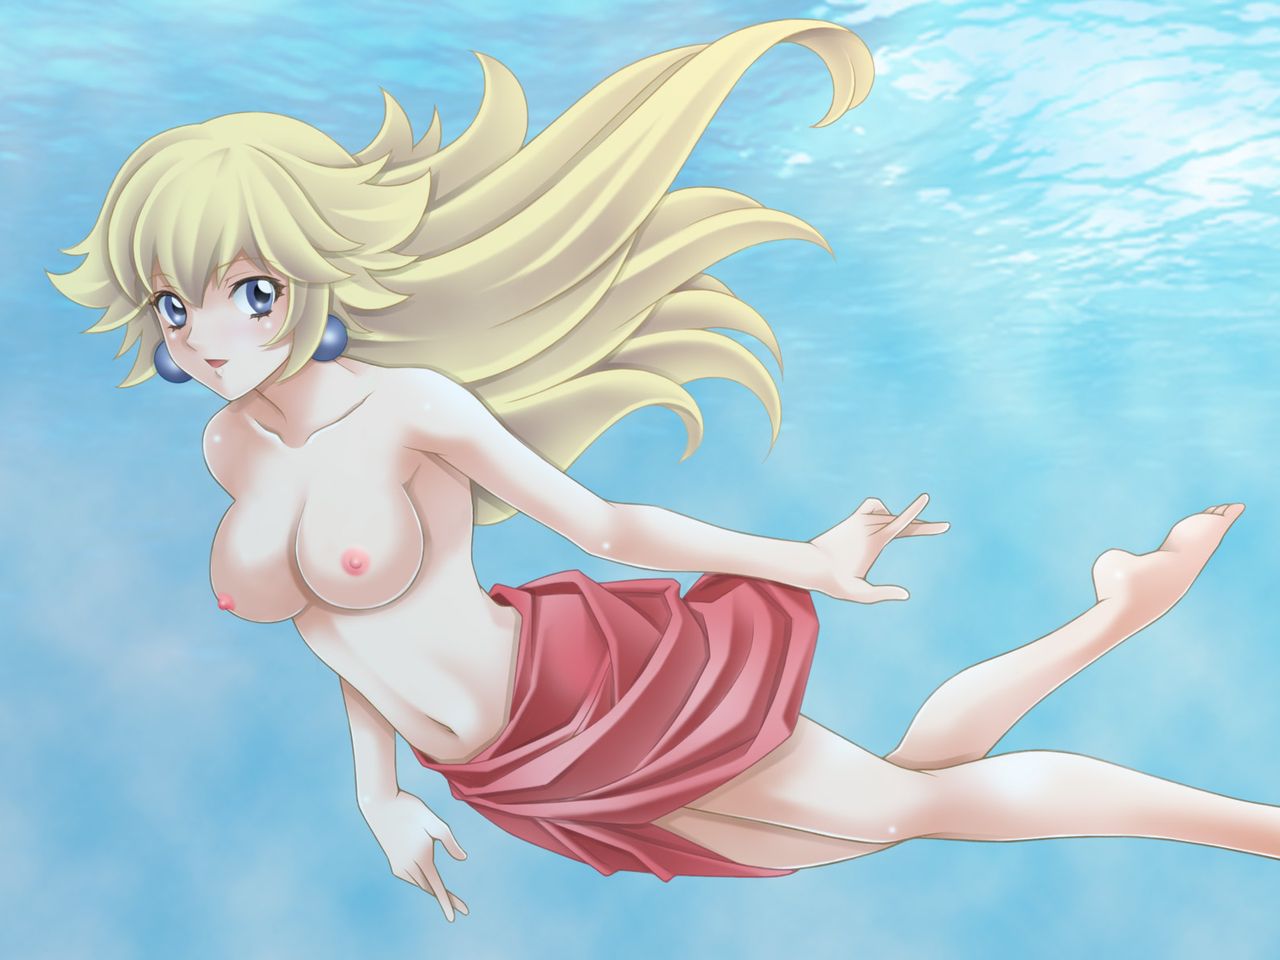 Girls Swiming and Floating in The Water 15